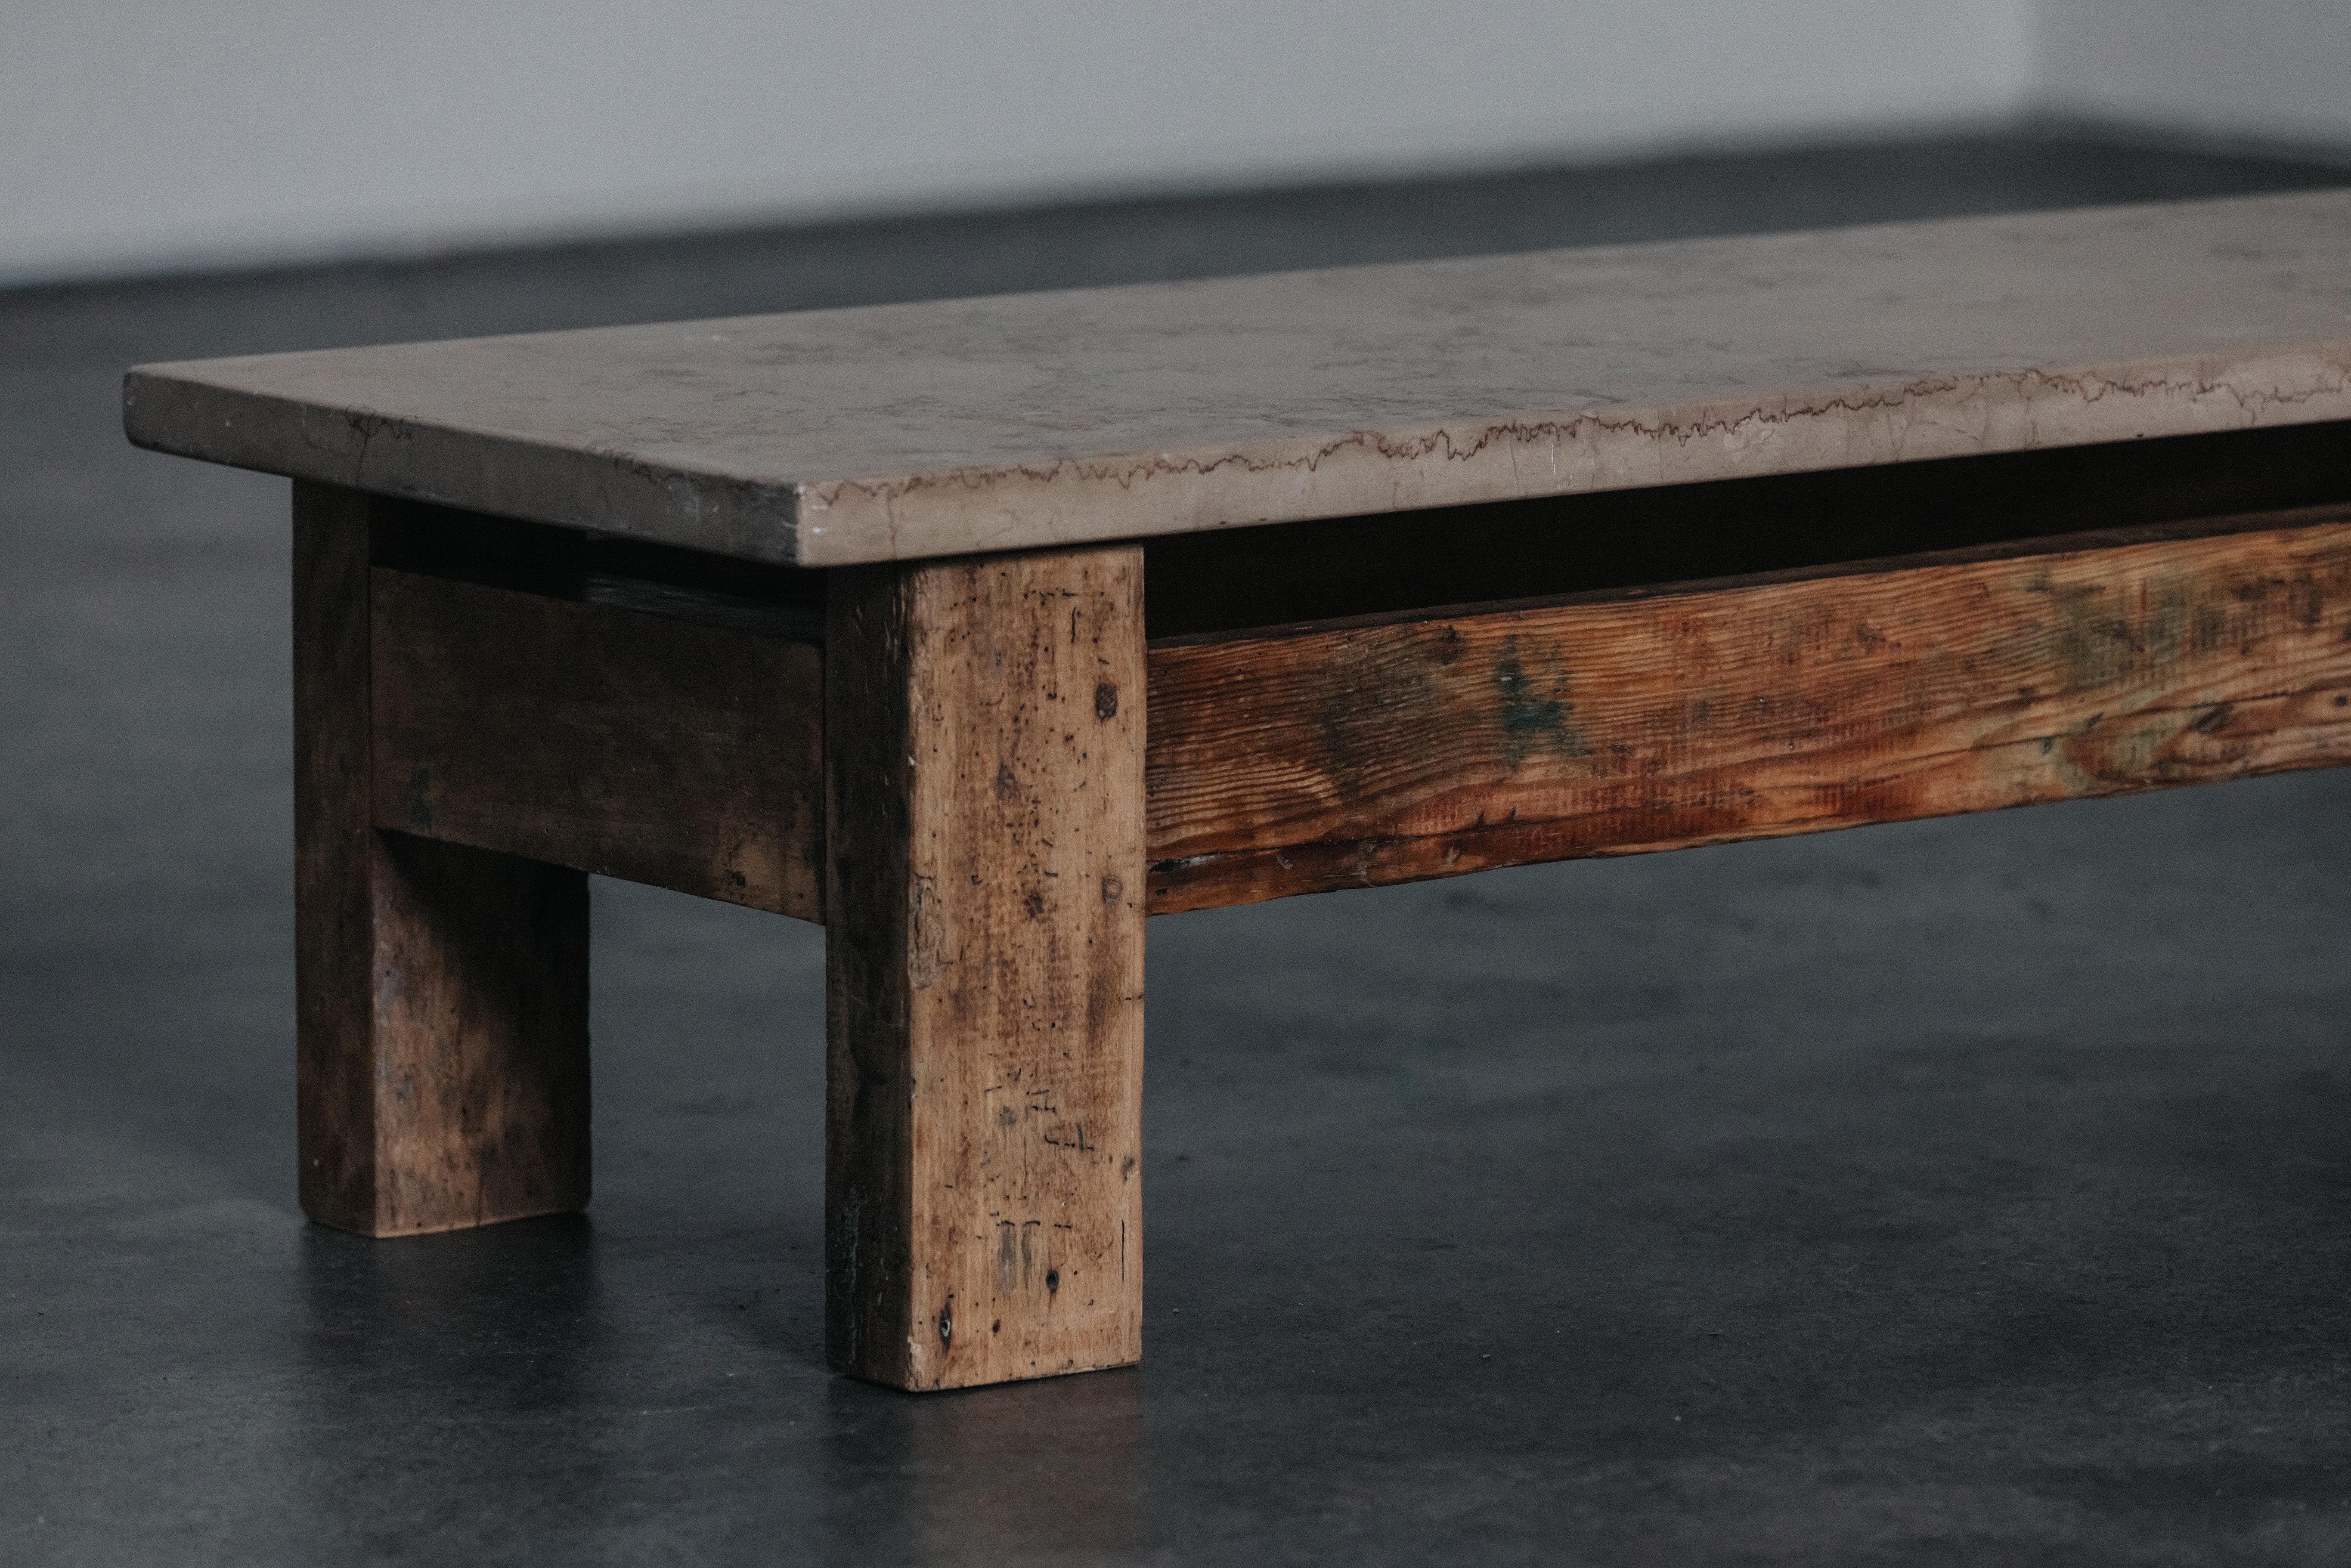 Vintage Oak And Stone Coffee Table From France,  Circa 1970.  Solid oak base with nice wear and use.